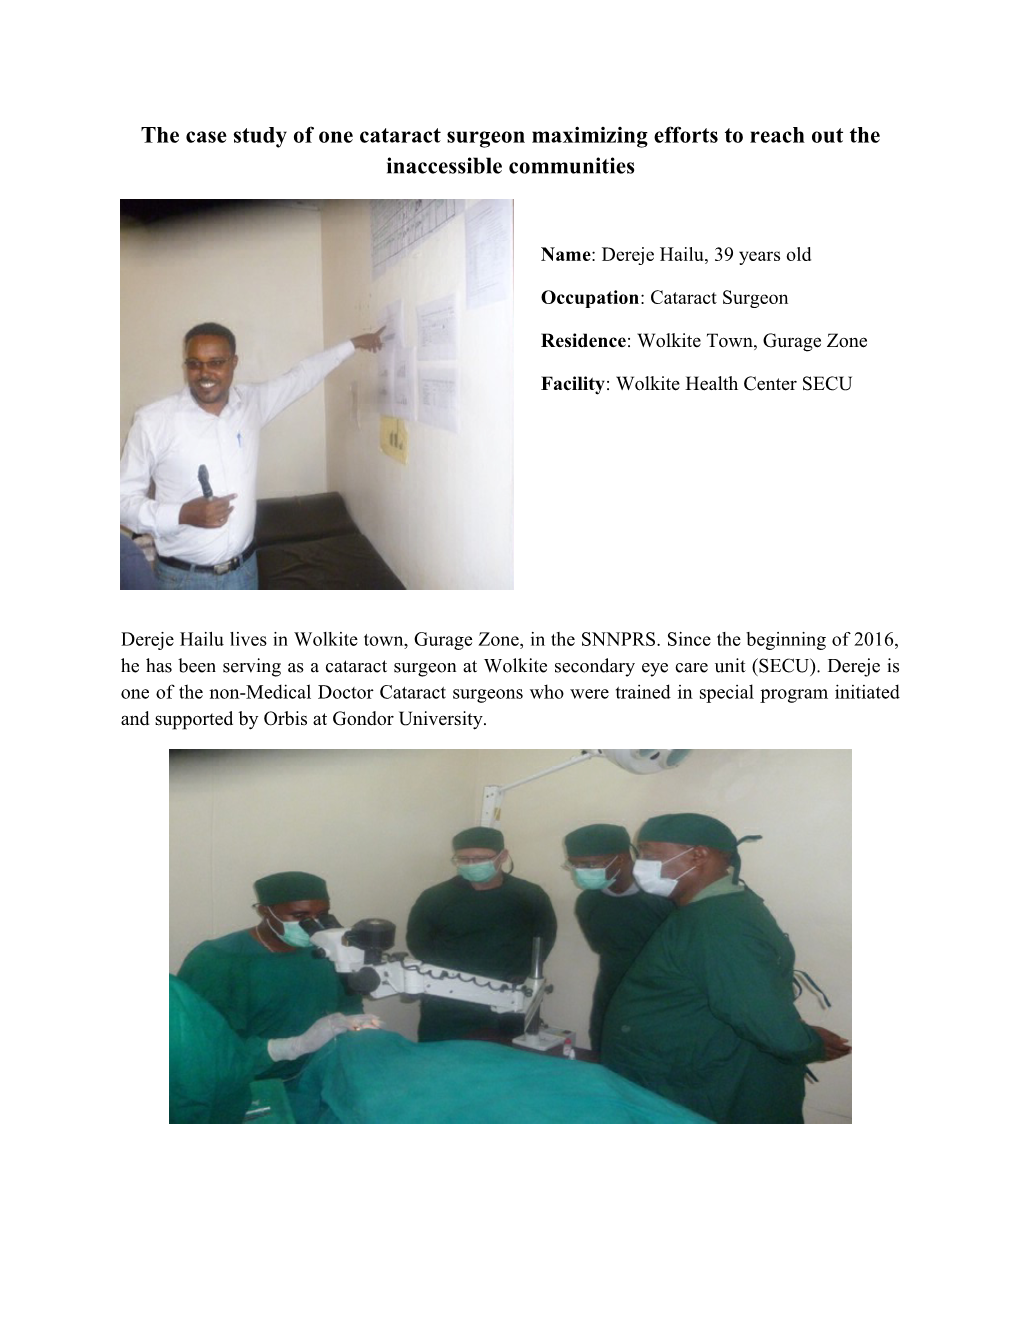 The Case Study of One Cataract Surgeon Maximizing Efforts to Reach out the Inaccessible